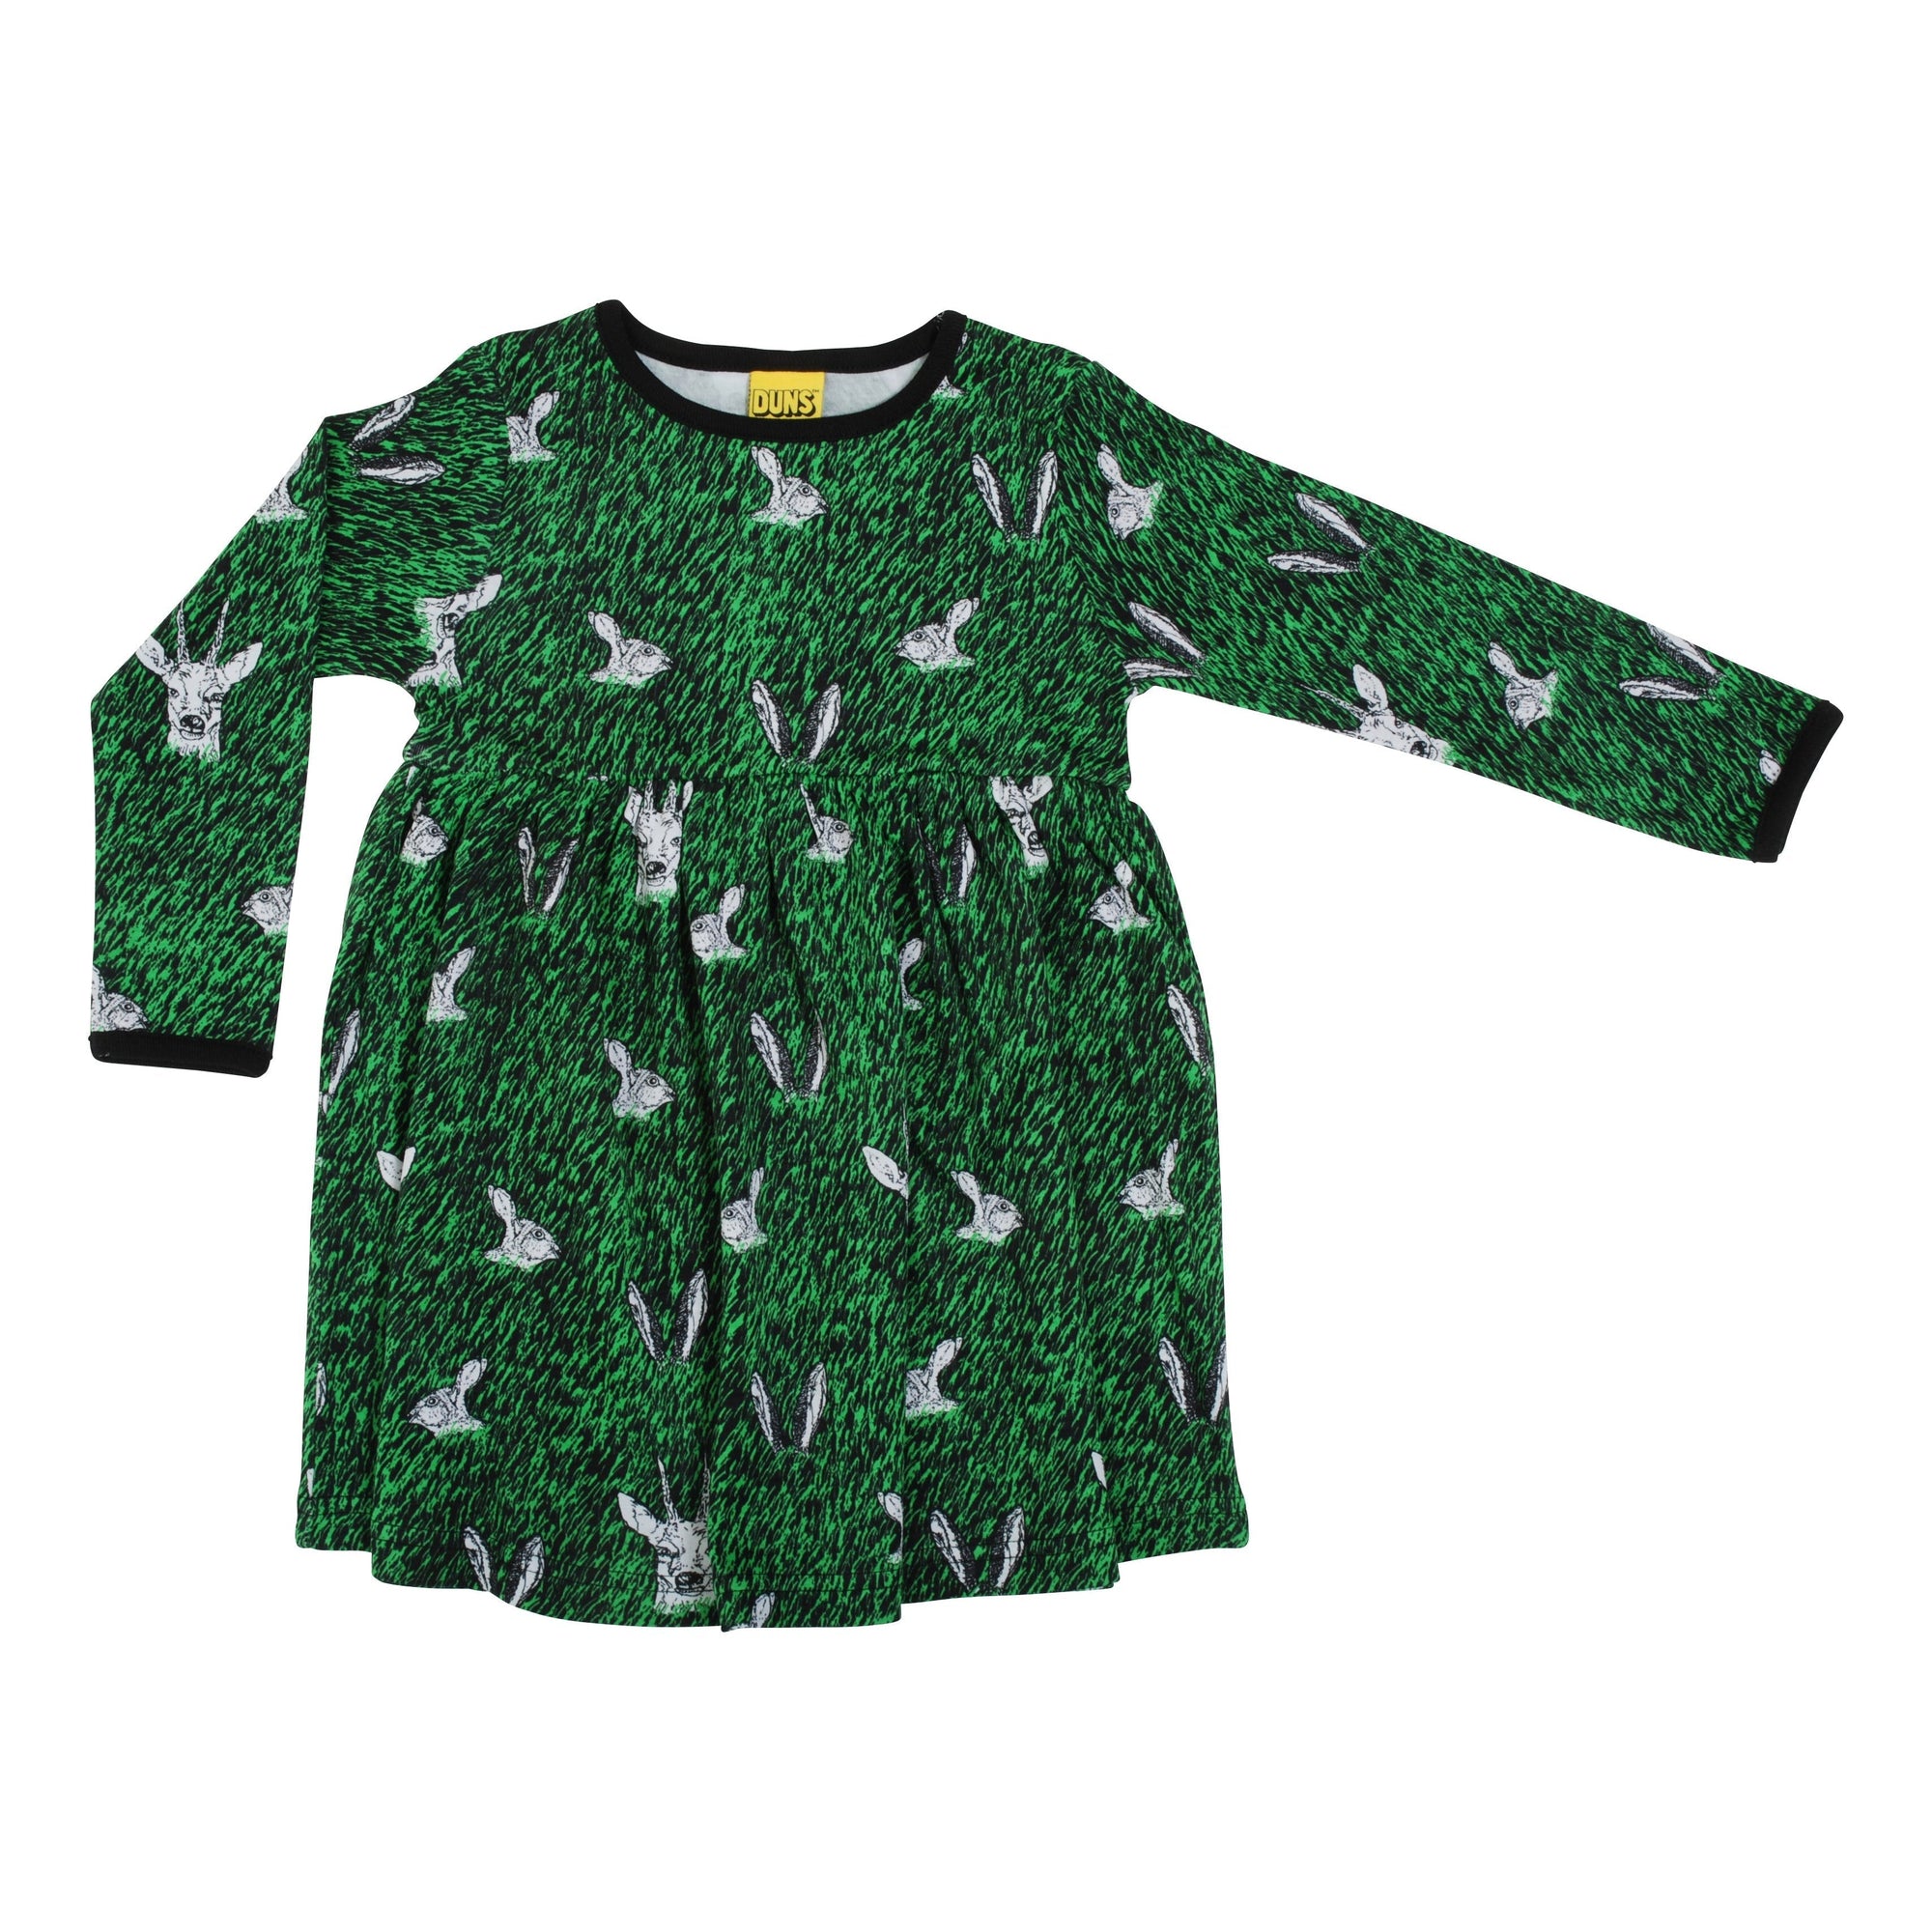 Hiding Long Sleeve Dress With Gathered Skirt - 1 Left Size 11-12 years-Duns Sweden-Modern Rascals